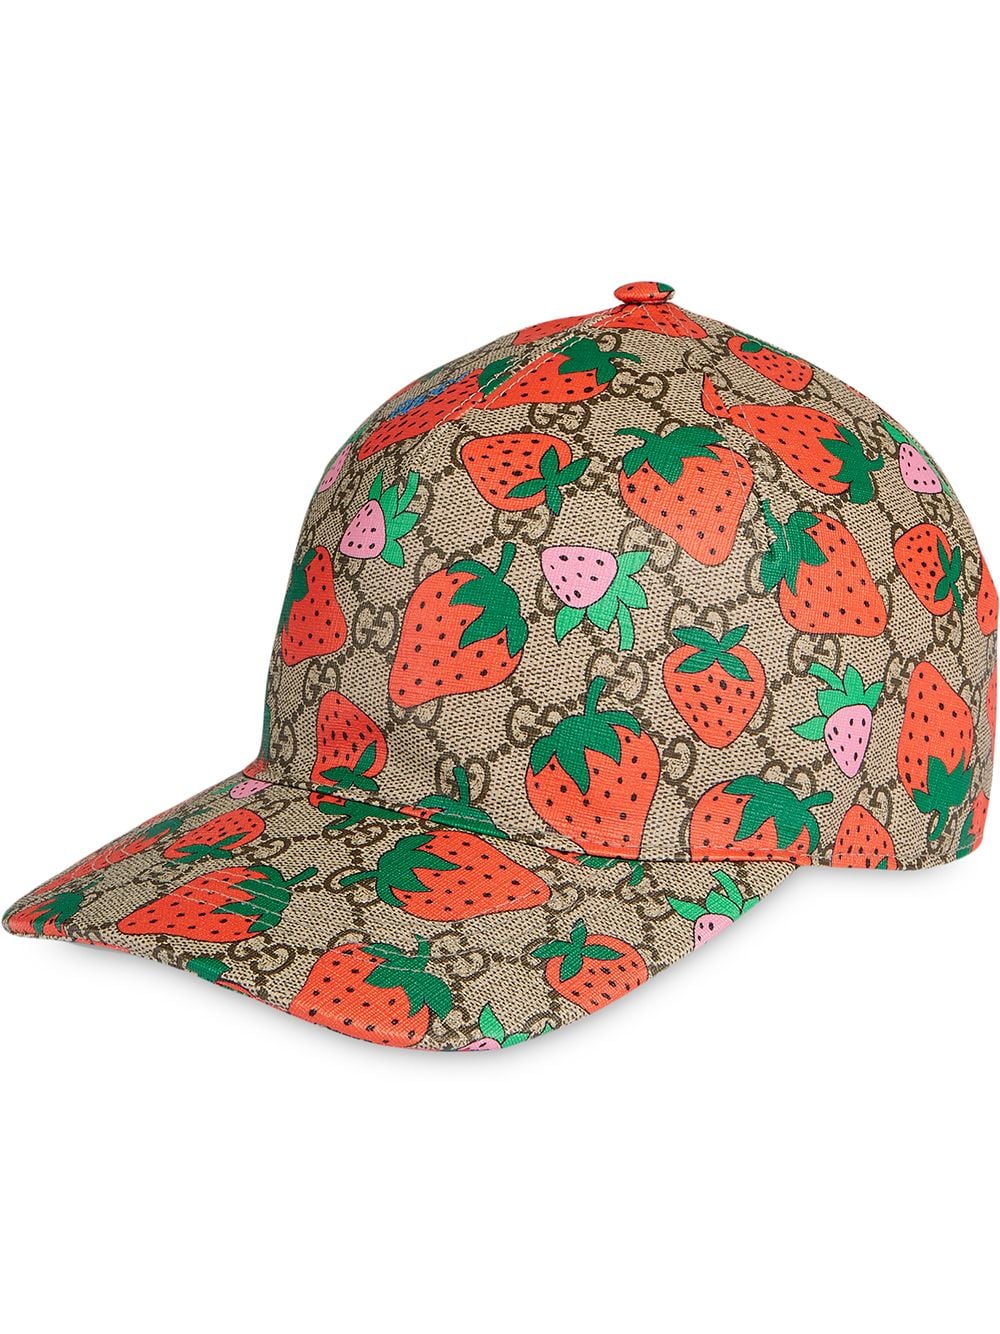 Gucci Women - Hats and Gloves for Women - Baseball Caps for Women